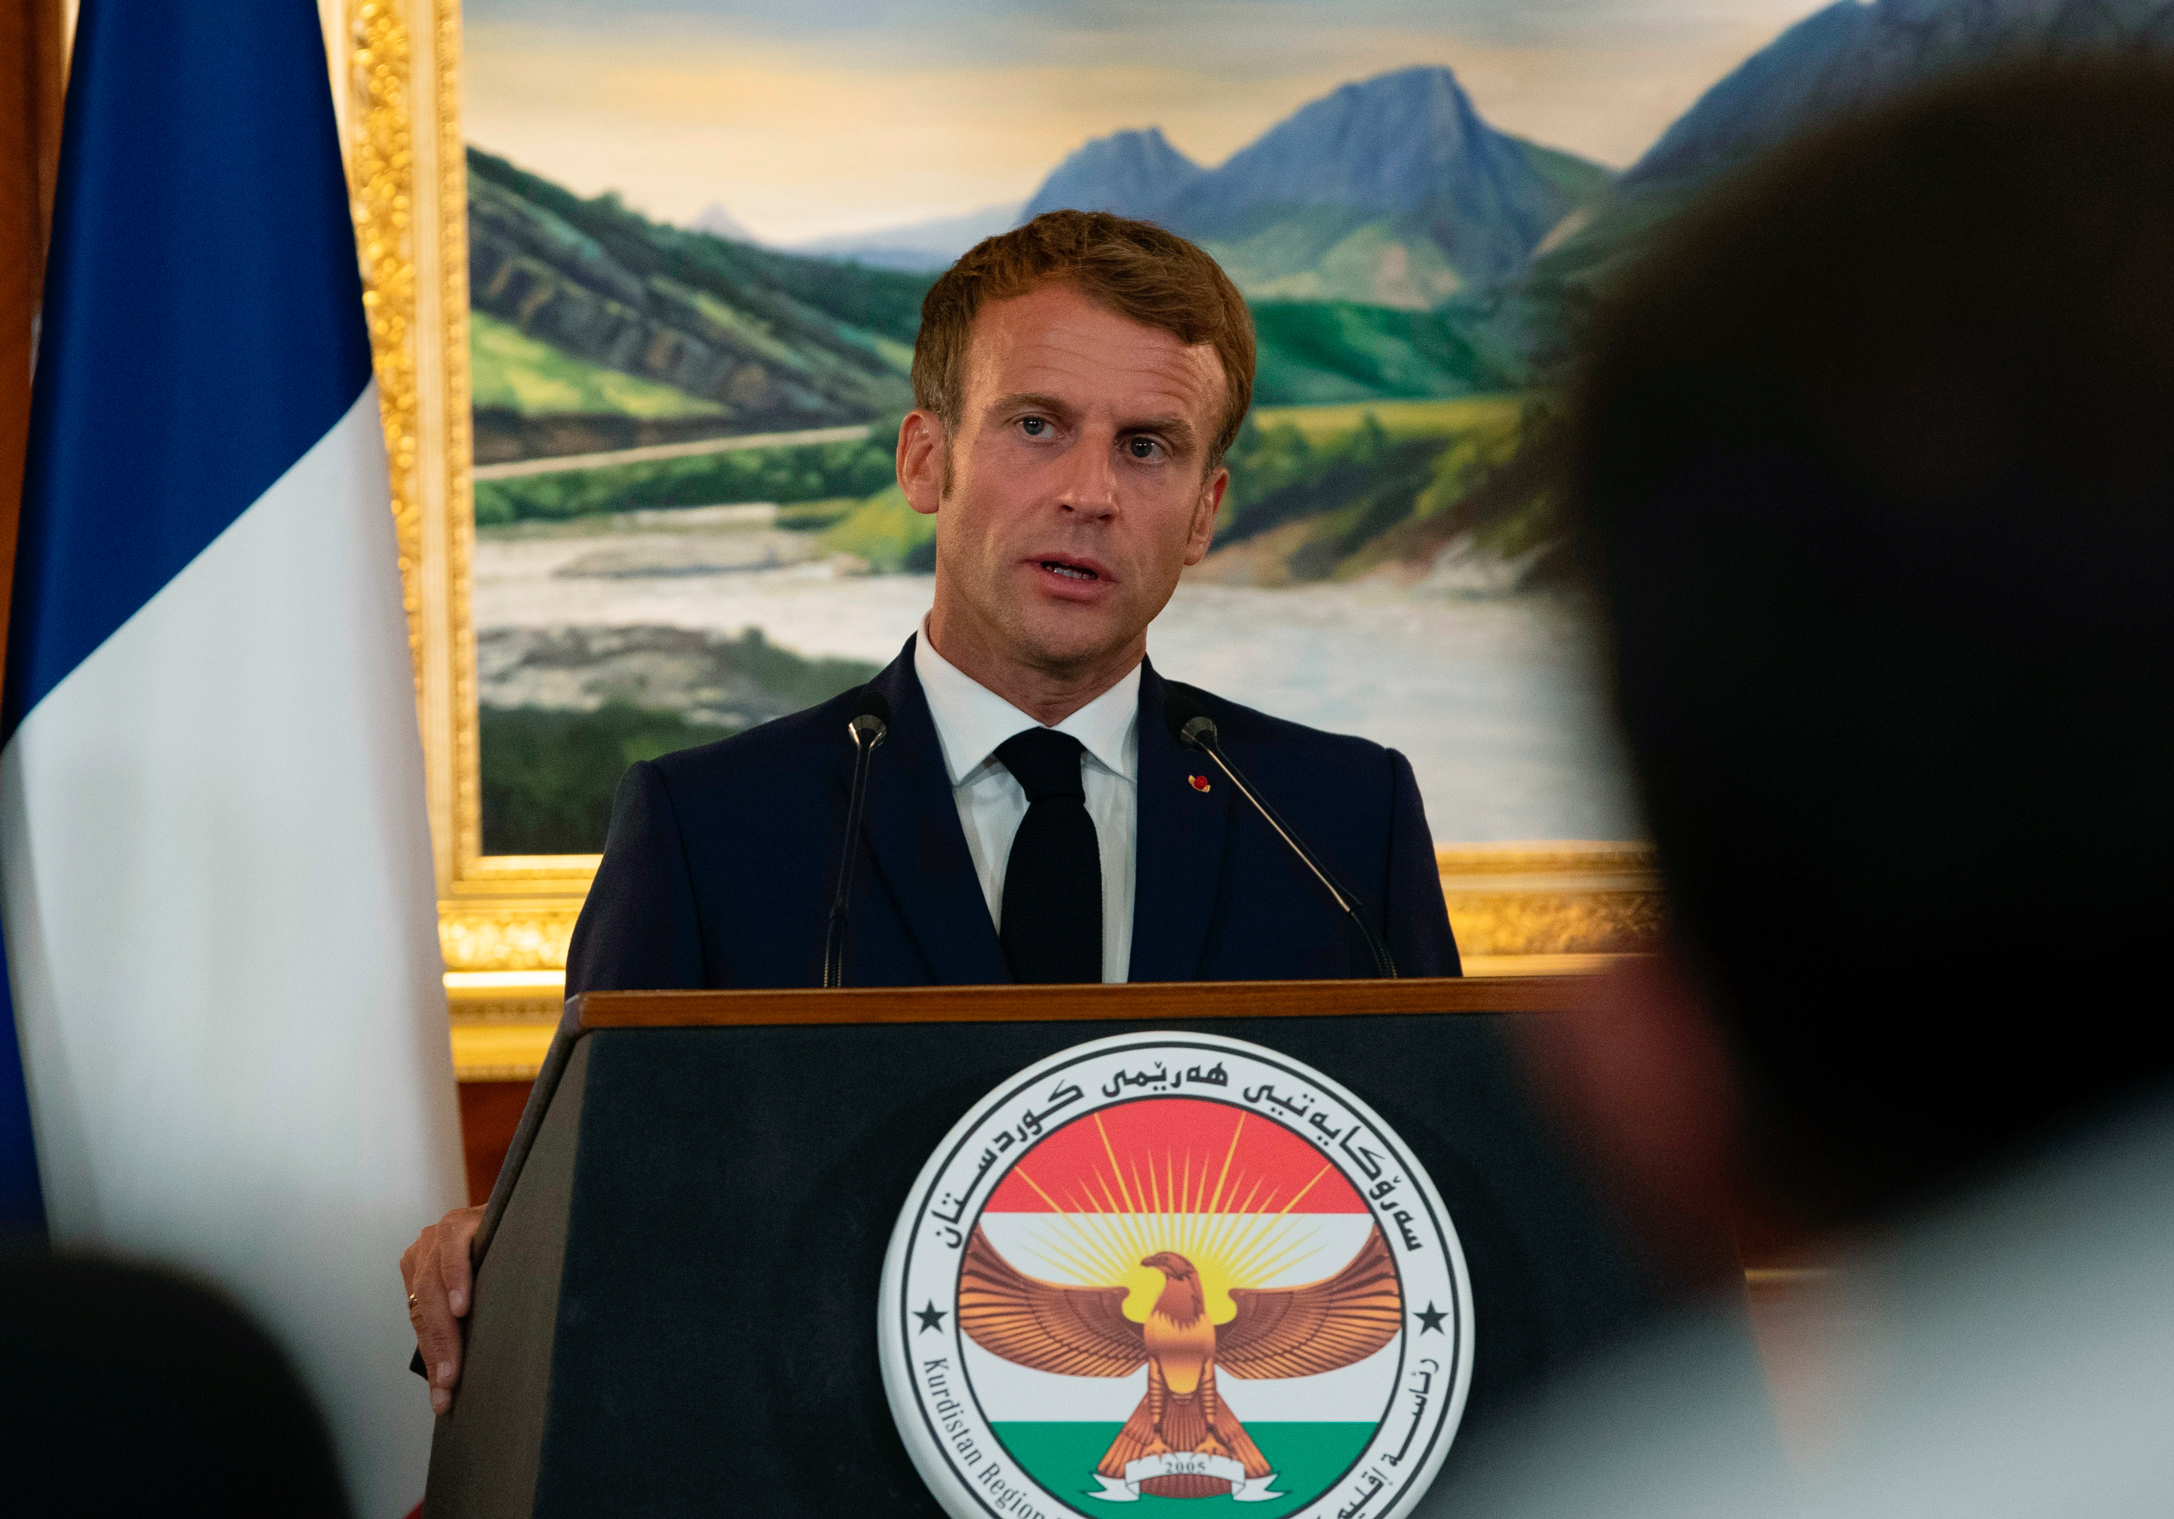 French President Emmanuel Macron speaks at a press conference following his meeting with Kurdish President Nechirvan Barzani in Irbil, Iraq, on Sunday, August 29.